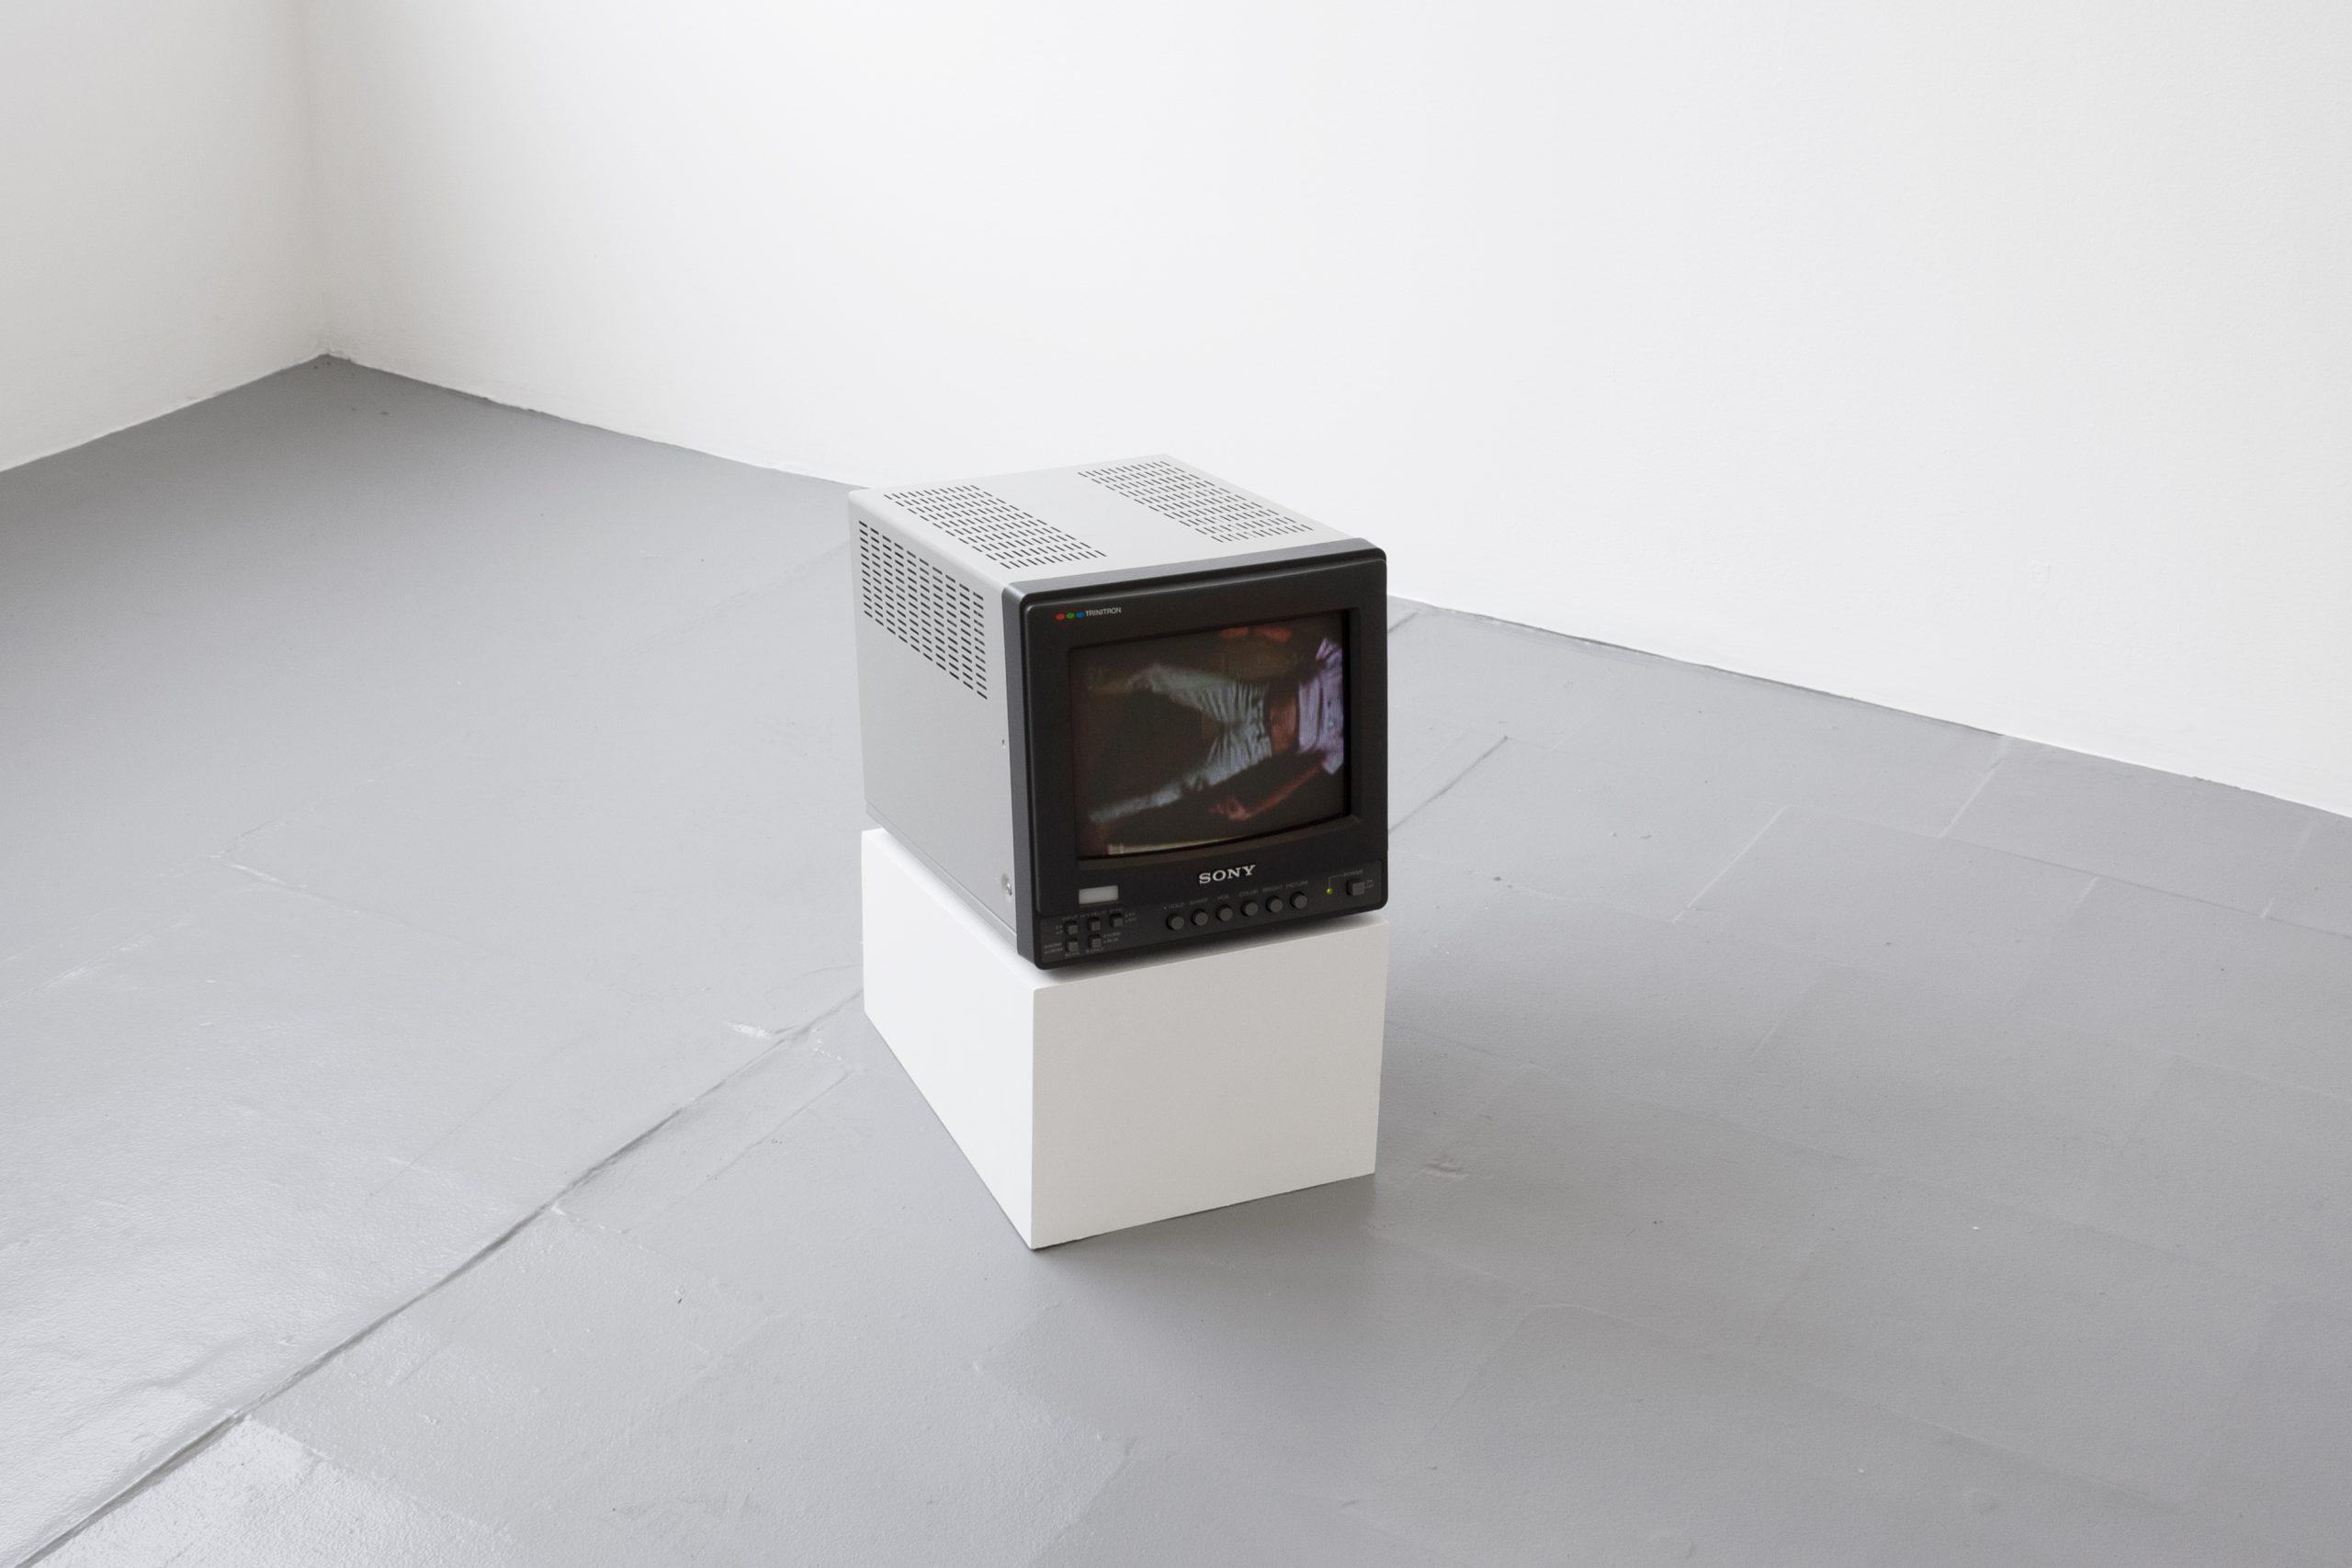 Image: In a corner of the gallery, a Sony CRT monitor plays a video of a figure wearing jeans, a purple shirt rolled up to reveal their stomach. The figure's head is out of frame. Image courtesy of Liz Vitlin and Prairie.